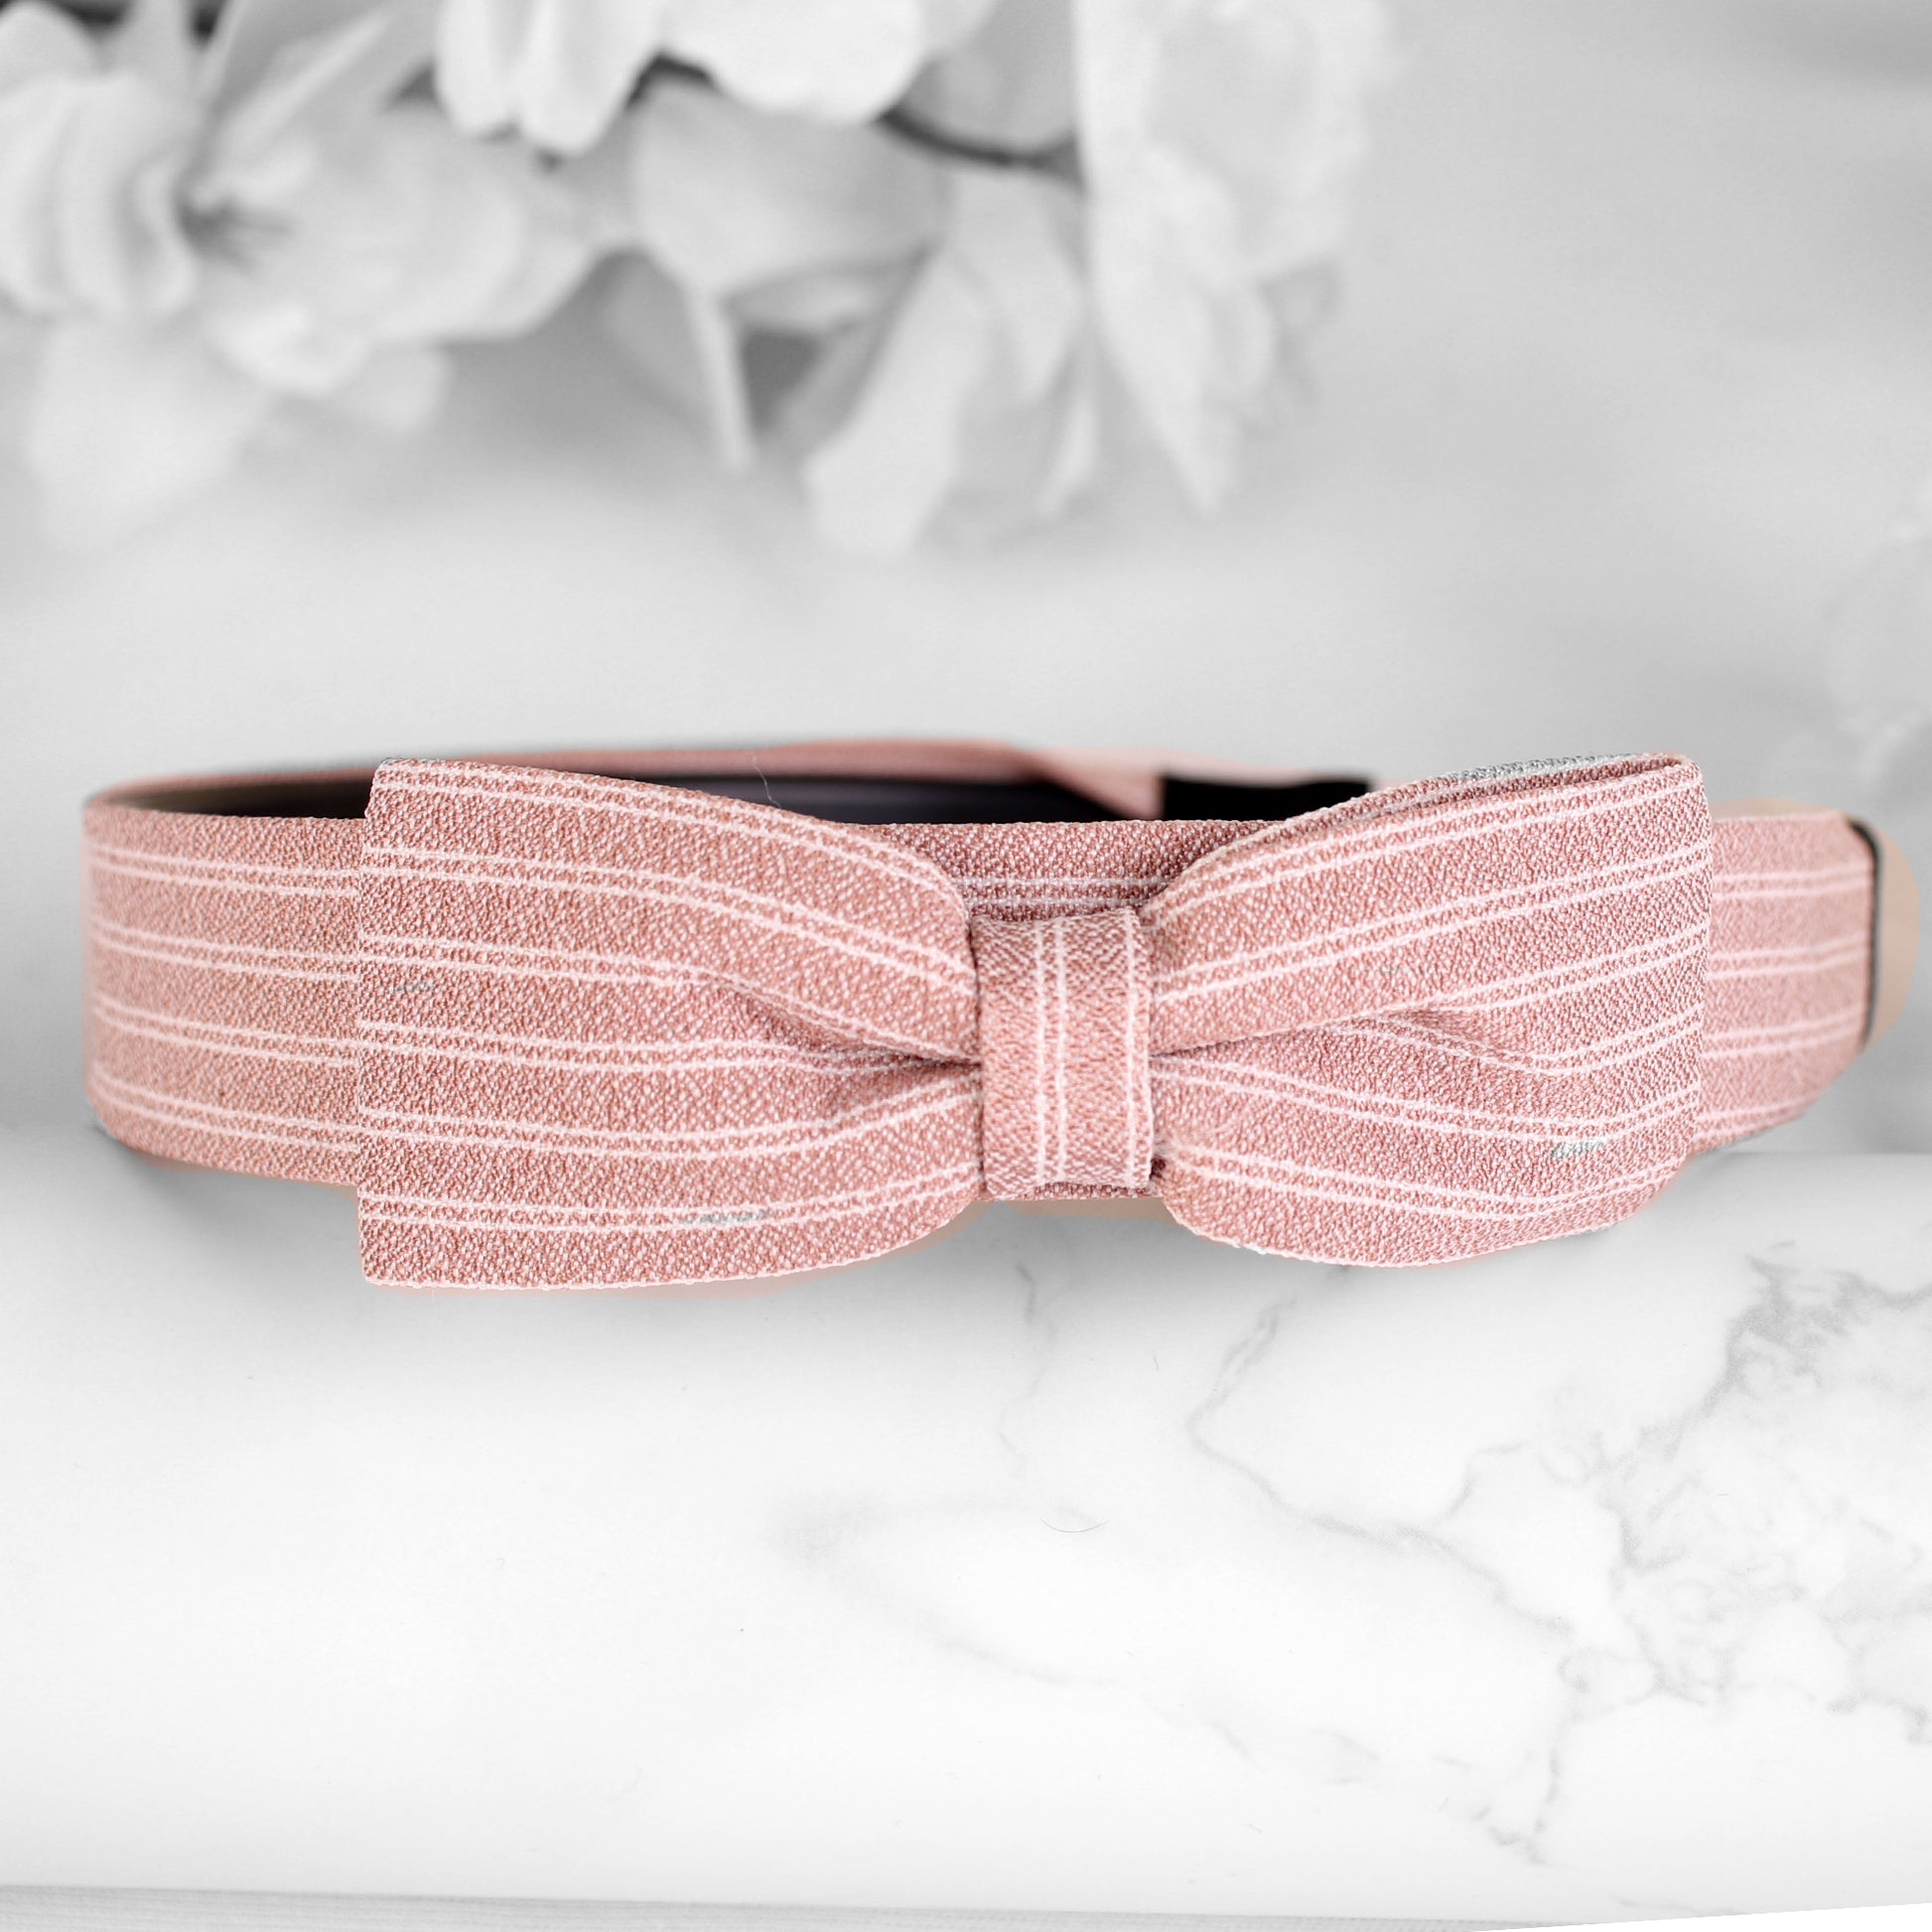 HairBand,Bewitching Bow Hair Band in Lavender Pink - Cippele Multi Store